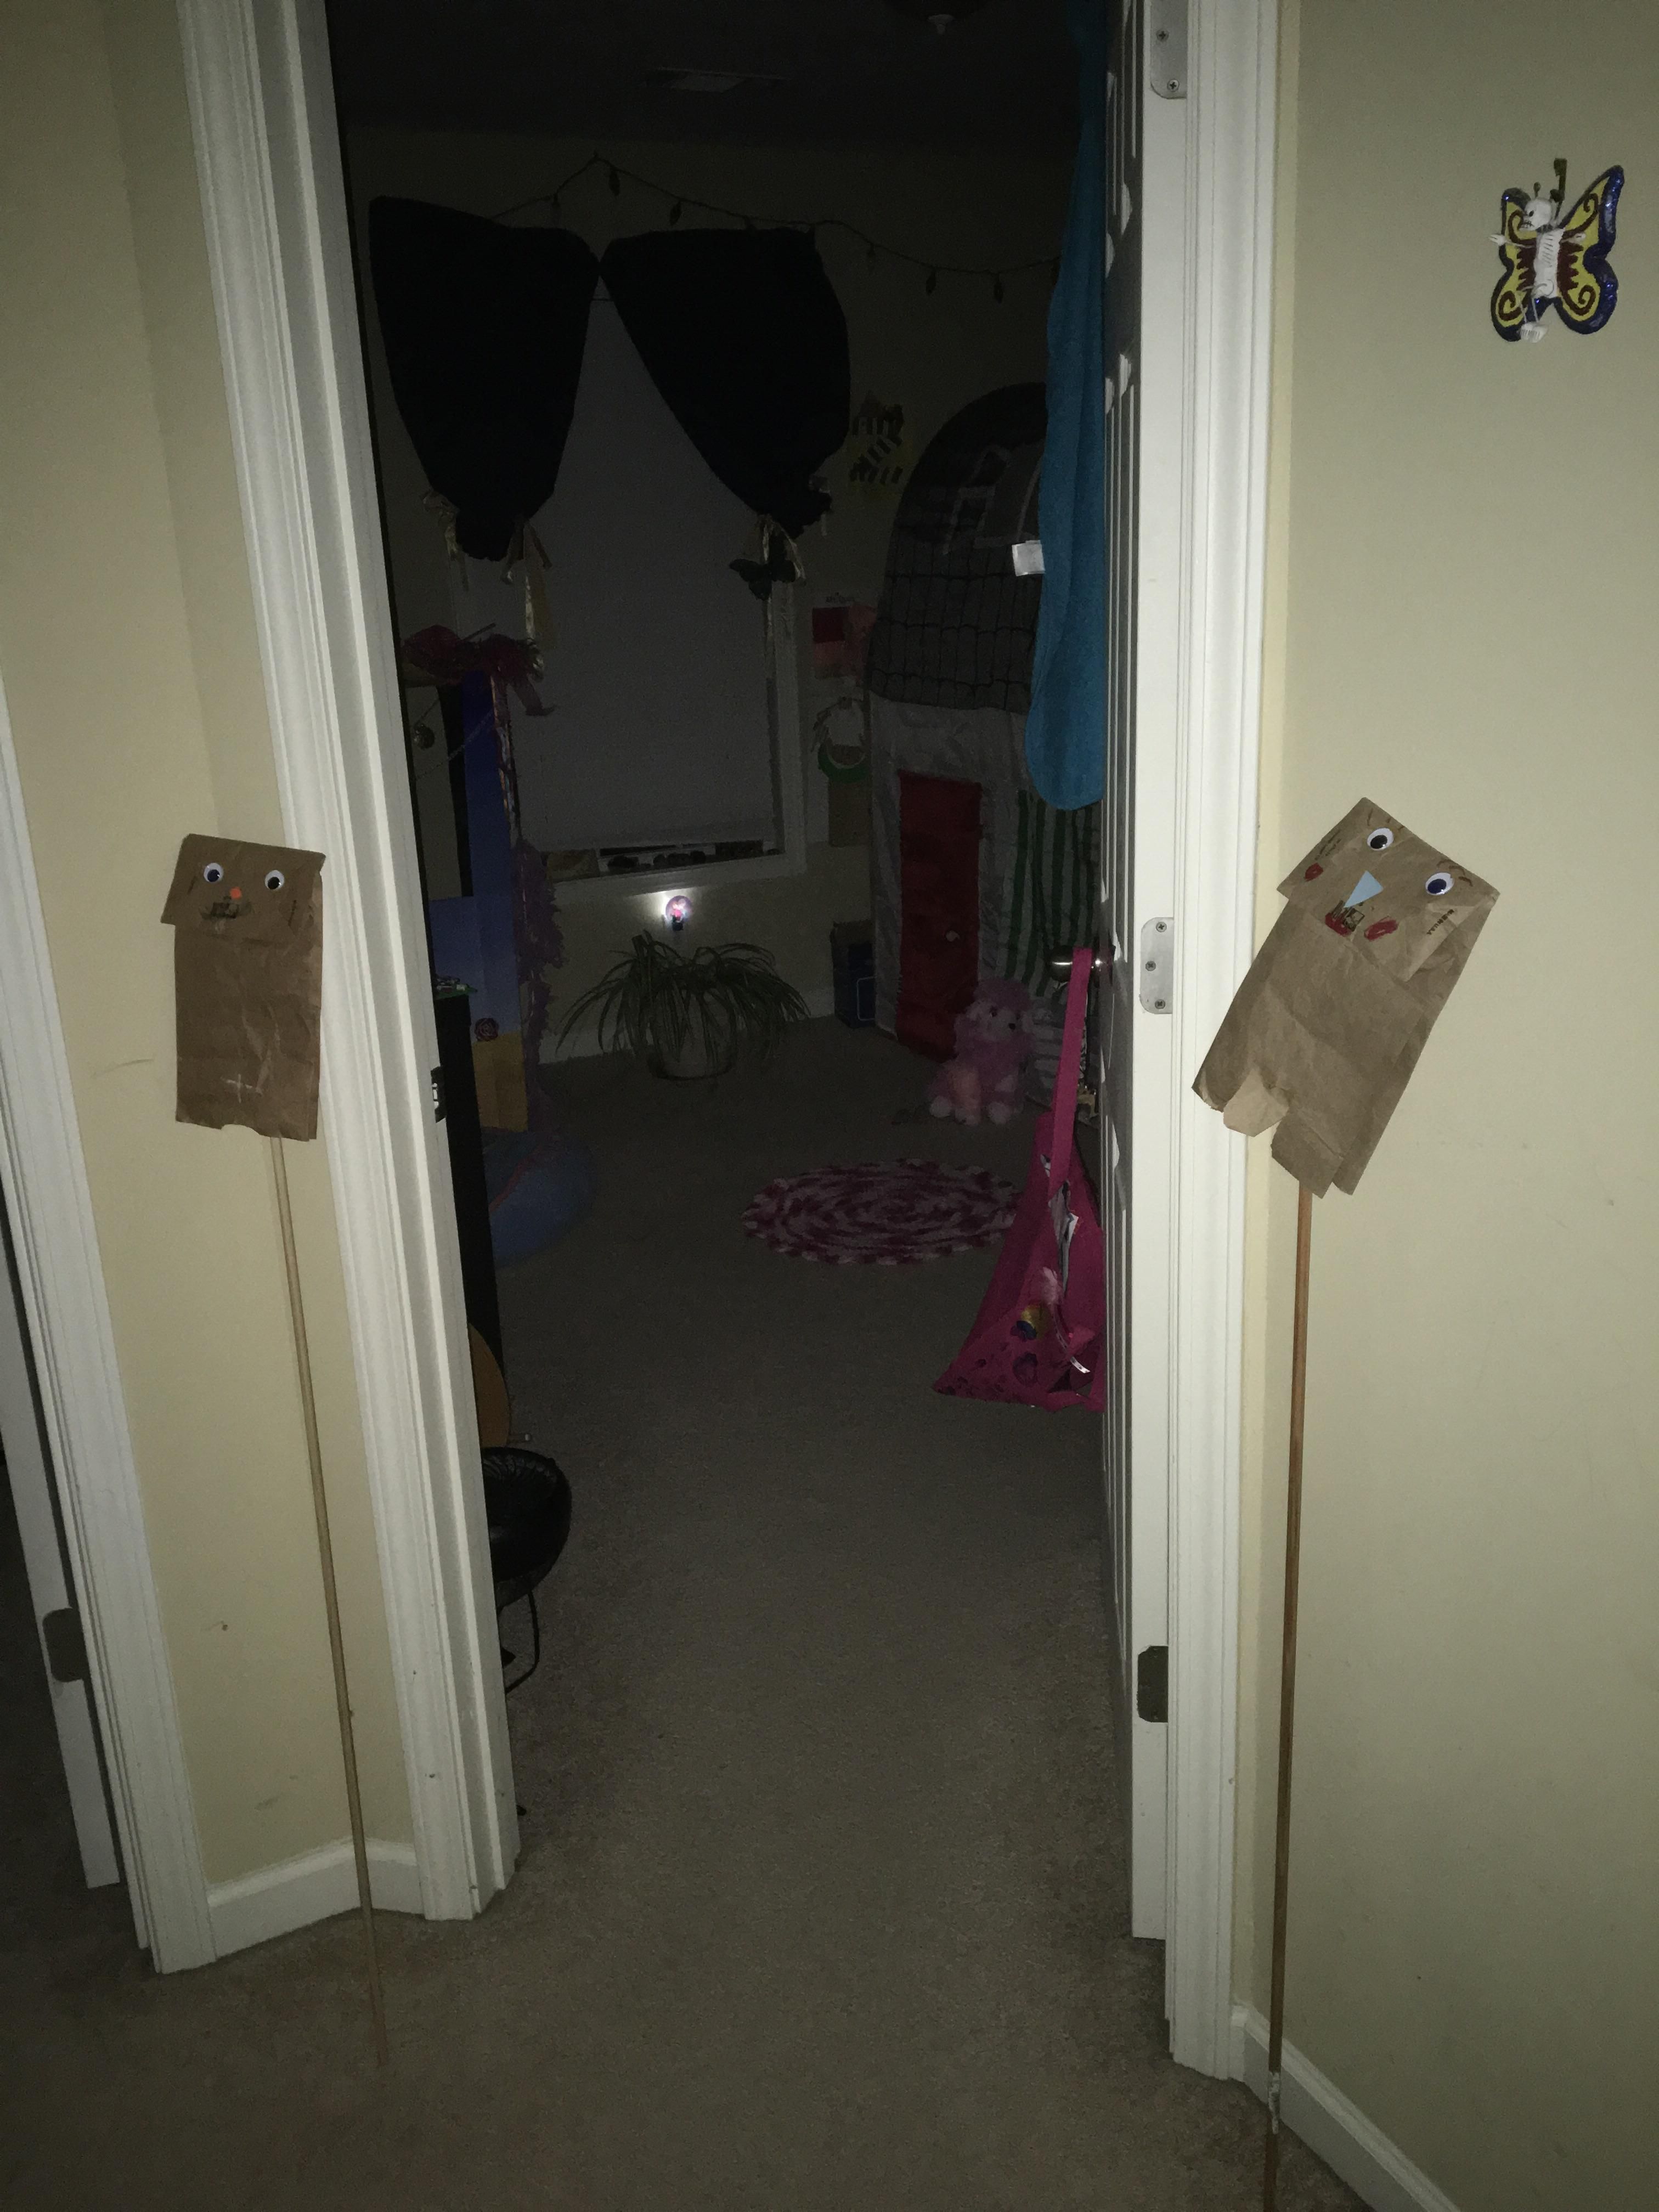 Last night my daughter had a bad dream. Today she made puppets to guard her room while she sleeps.